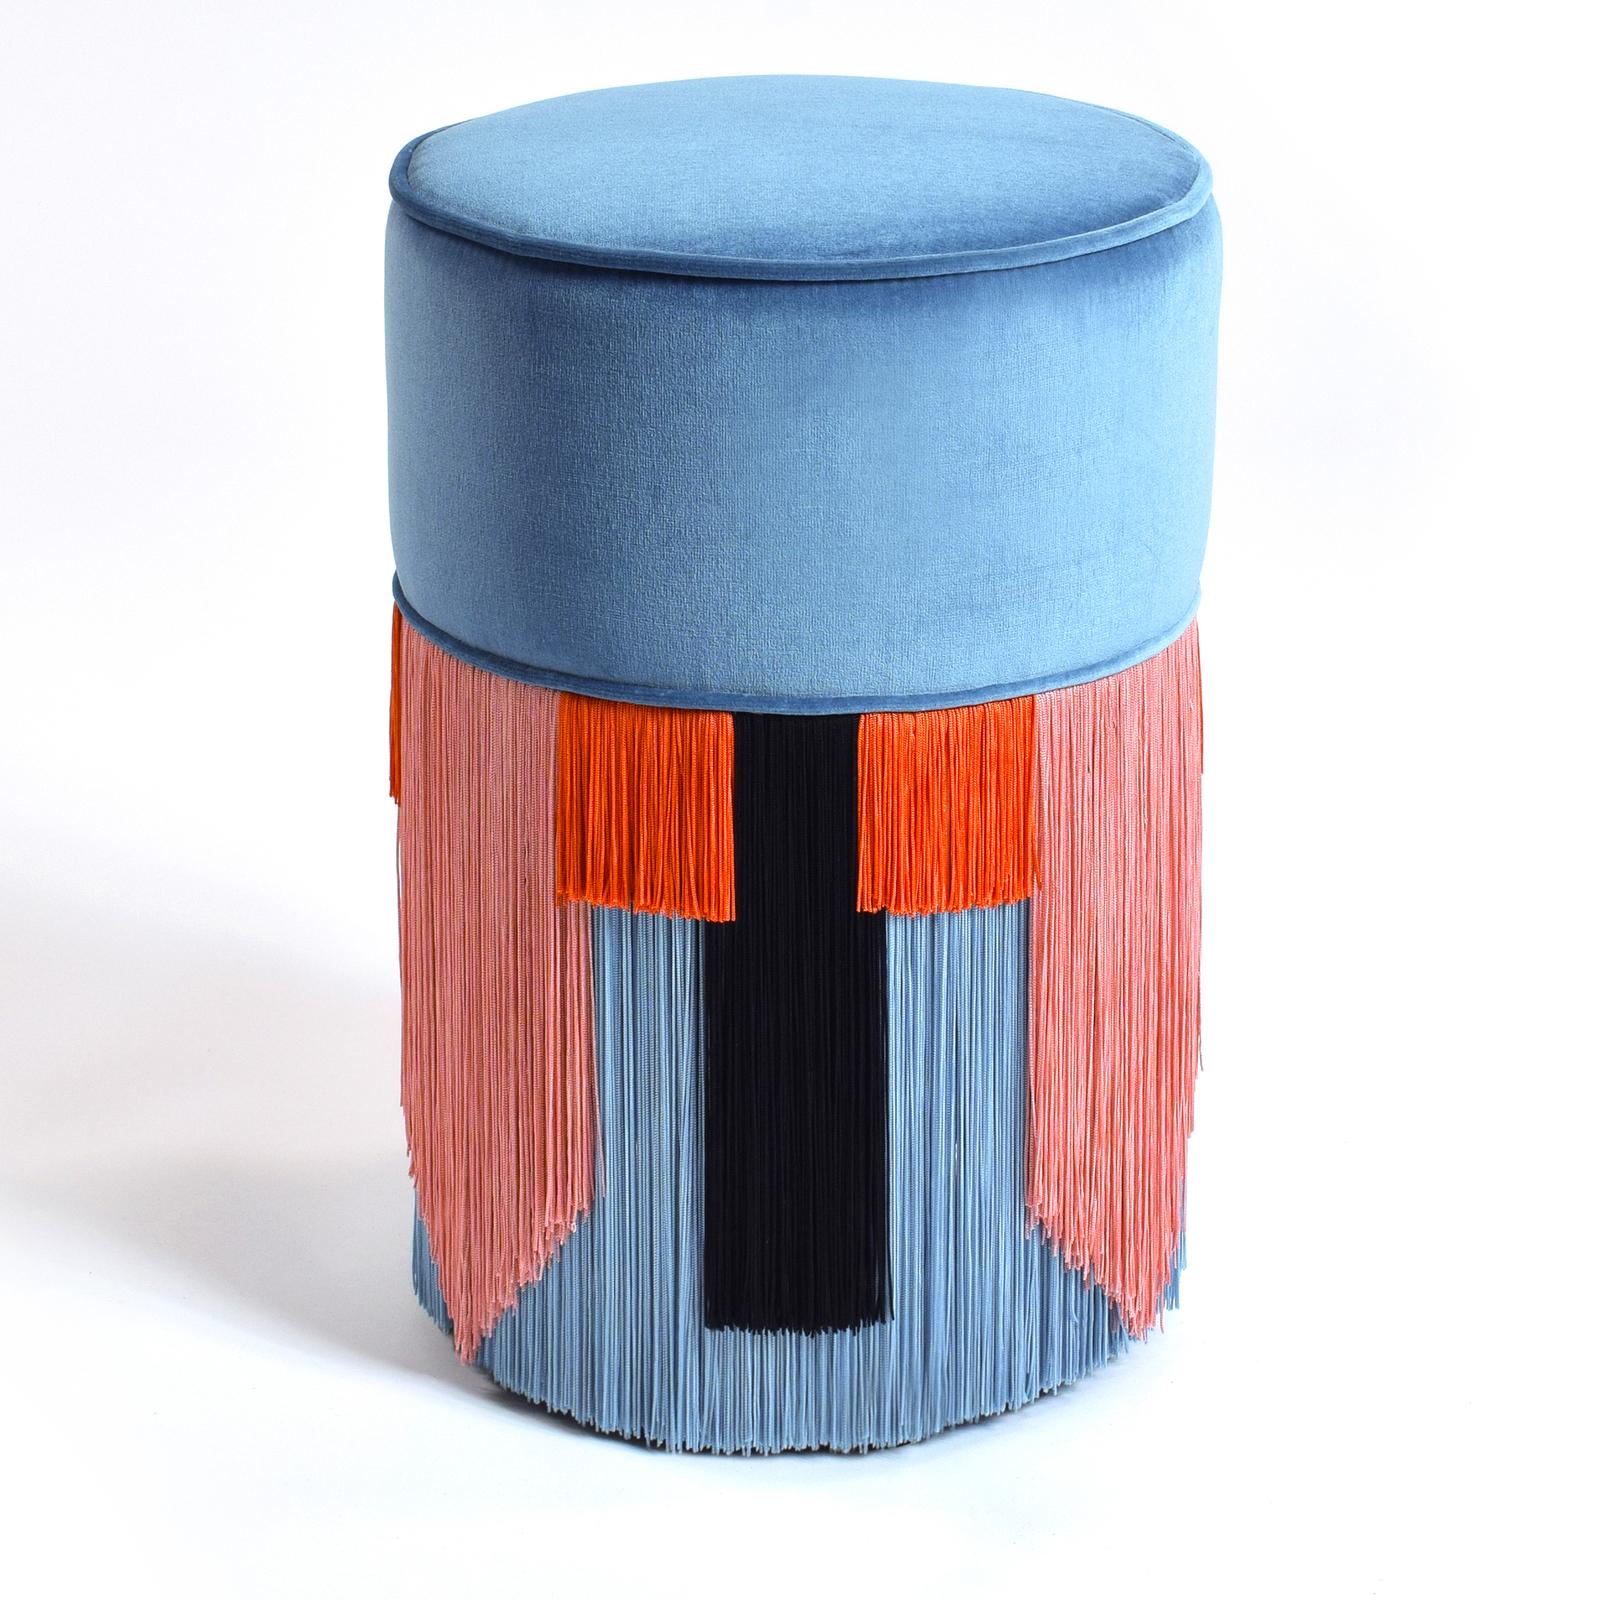 Marked by original design and vibrant colors, the tall and slender beech wood frame of this pouf supports the seat cushion, filled with synthetic padding and upholstered in a delicate light blue velvet for a long-lasting, soft feel. The bottom half